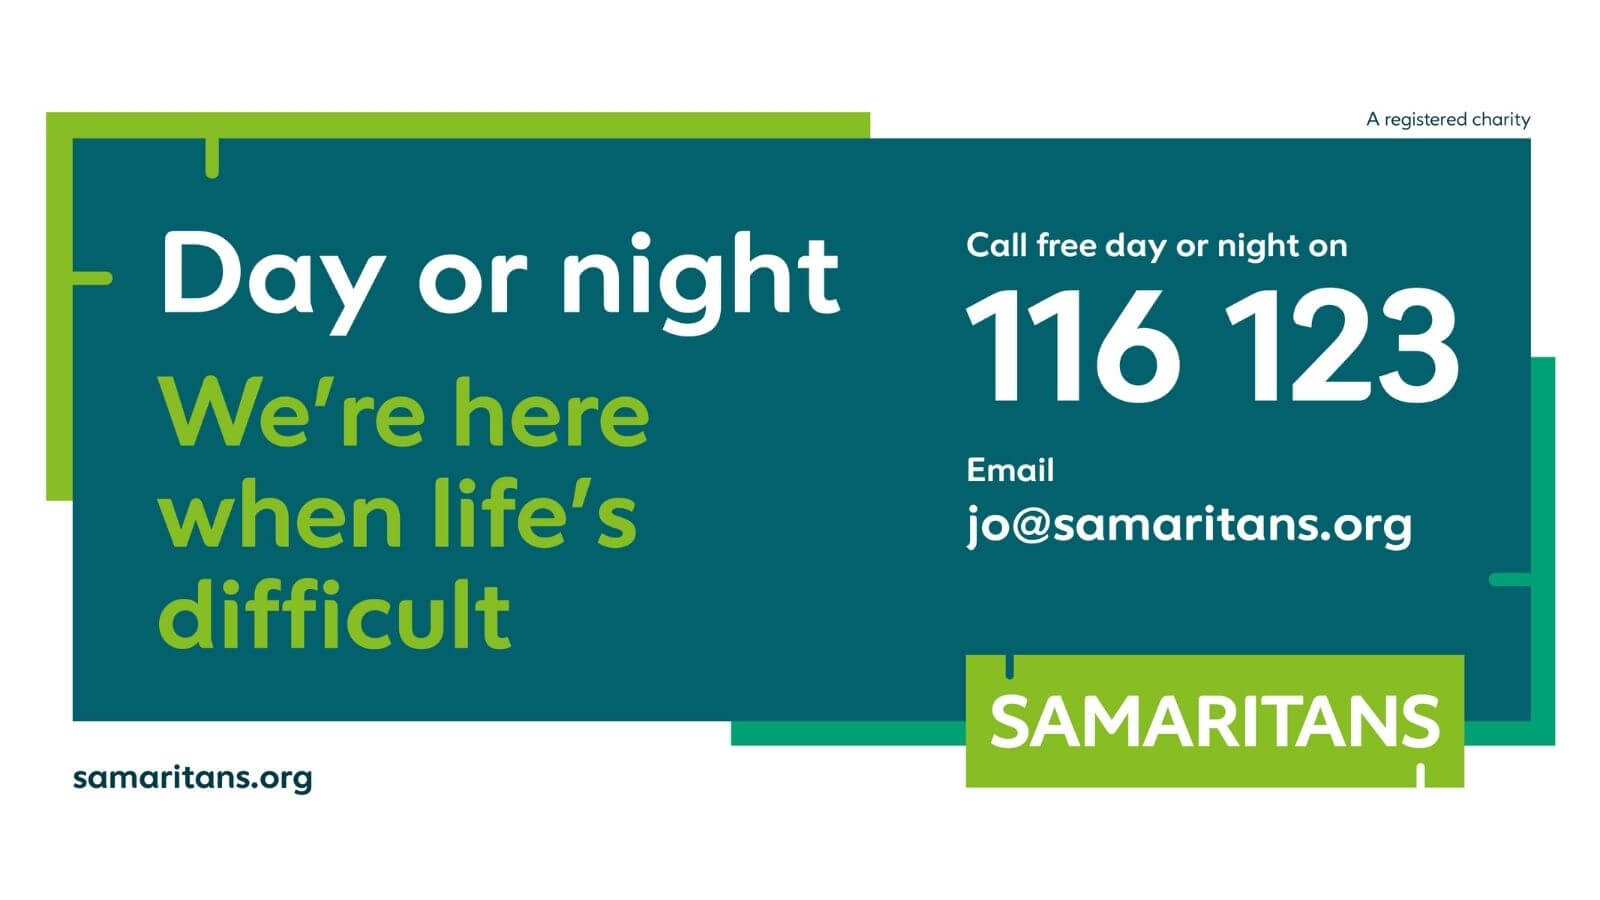 Whatever you’re facing, contact Samaritans free – day or night, 365 days a year. Call 116 123 or email jo@samaritans.org.